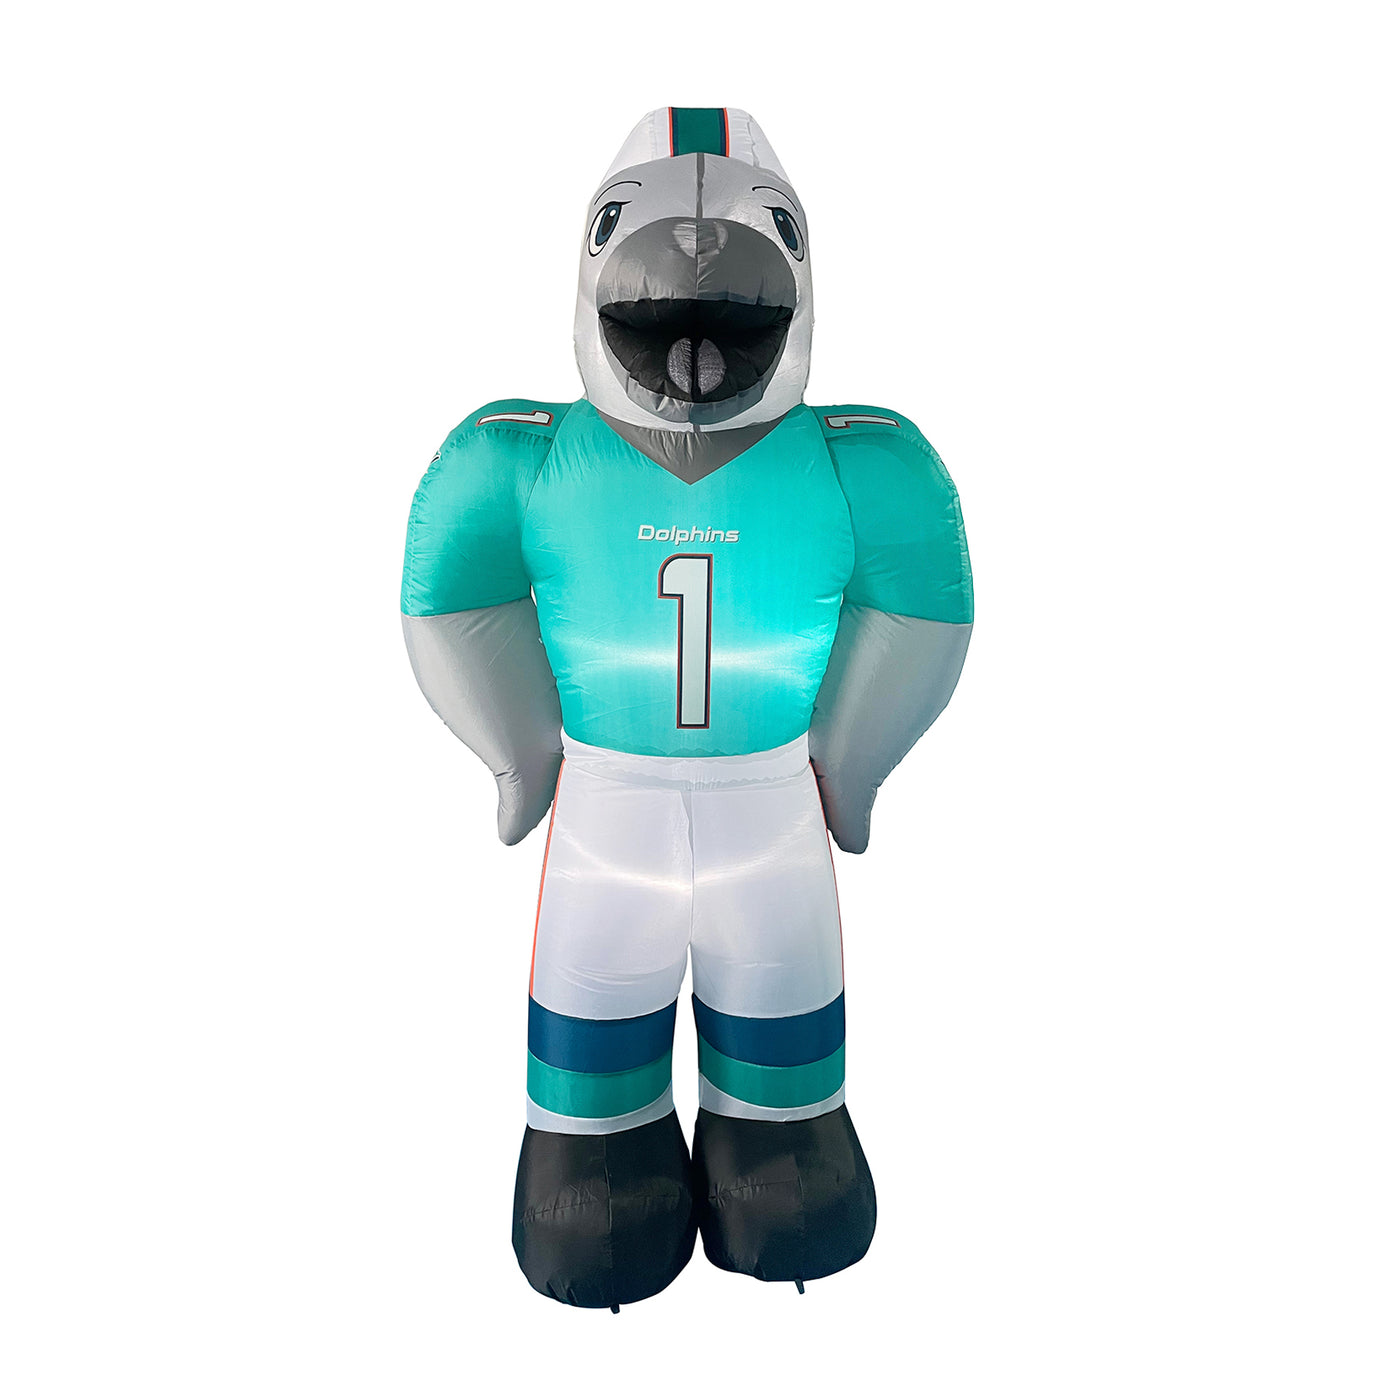 Miami Dolphins Inflatable Mascot